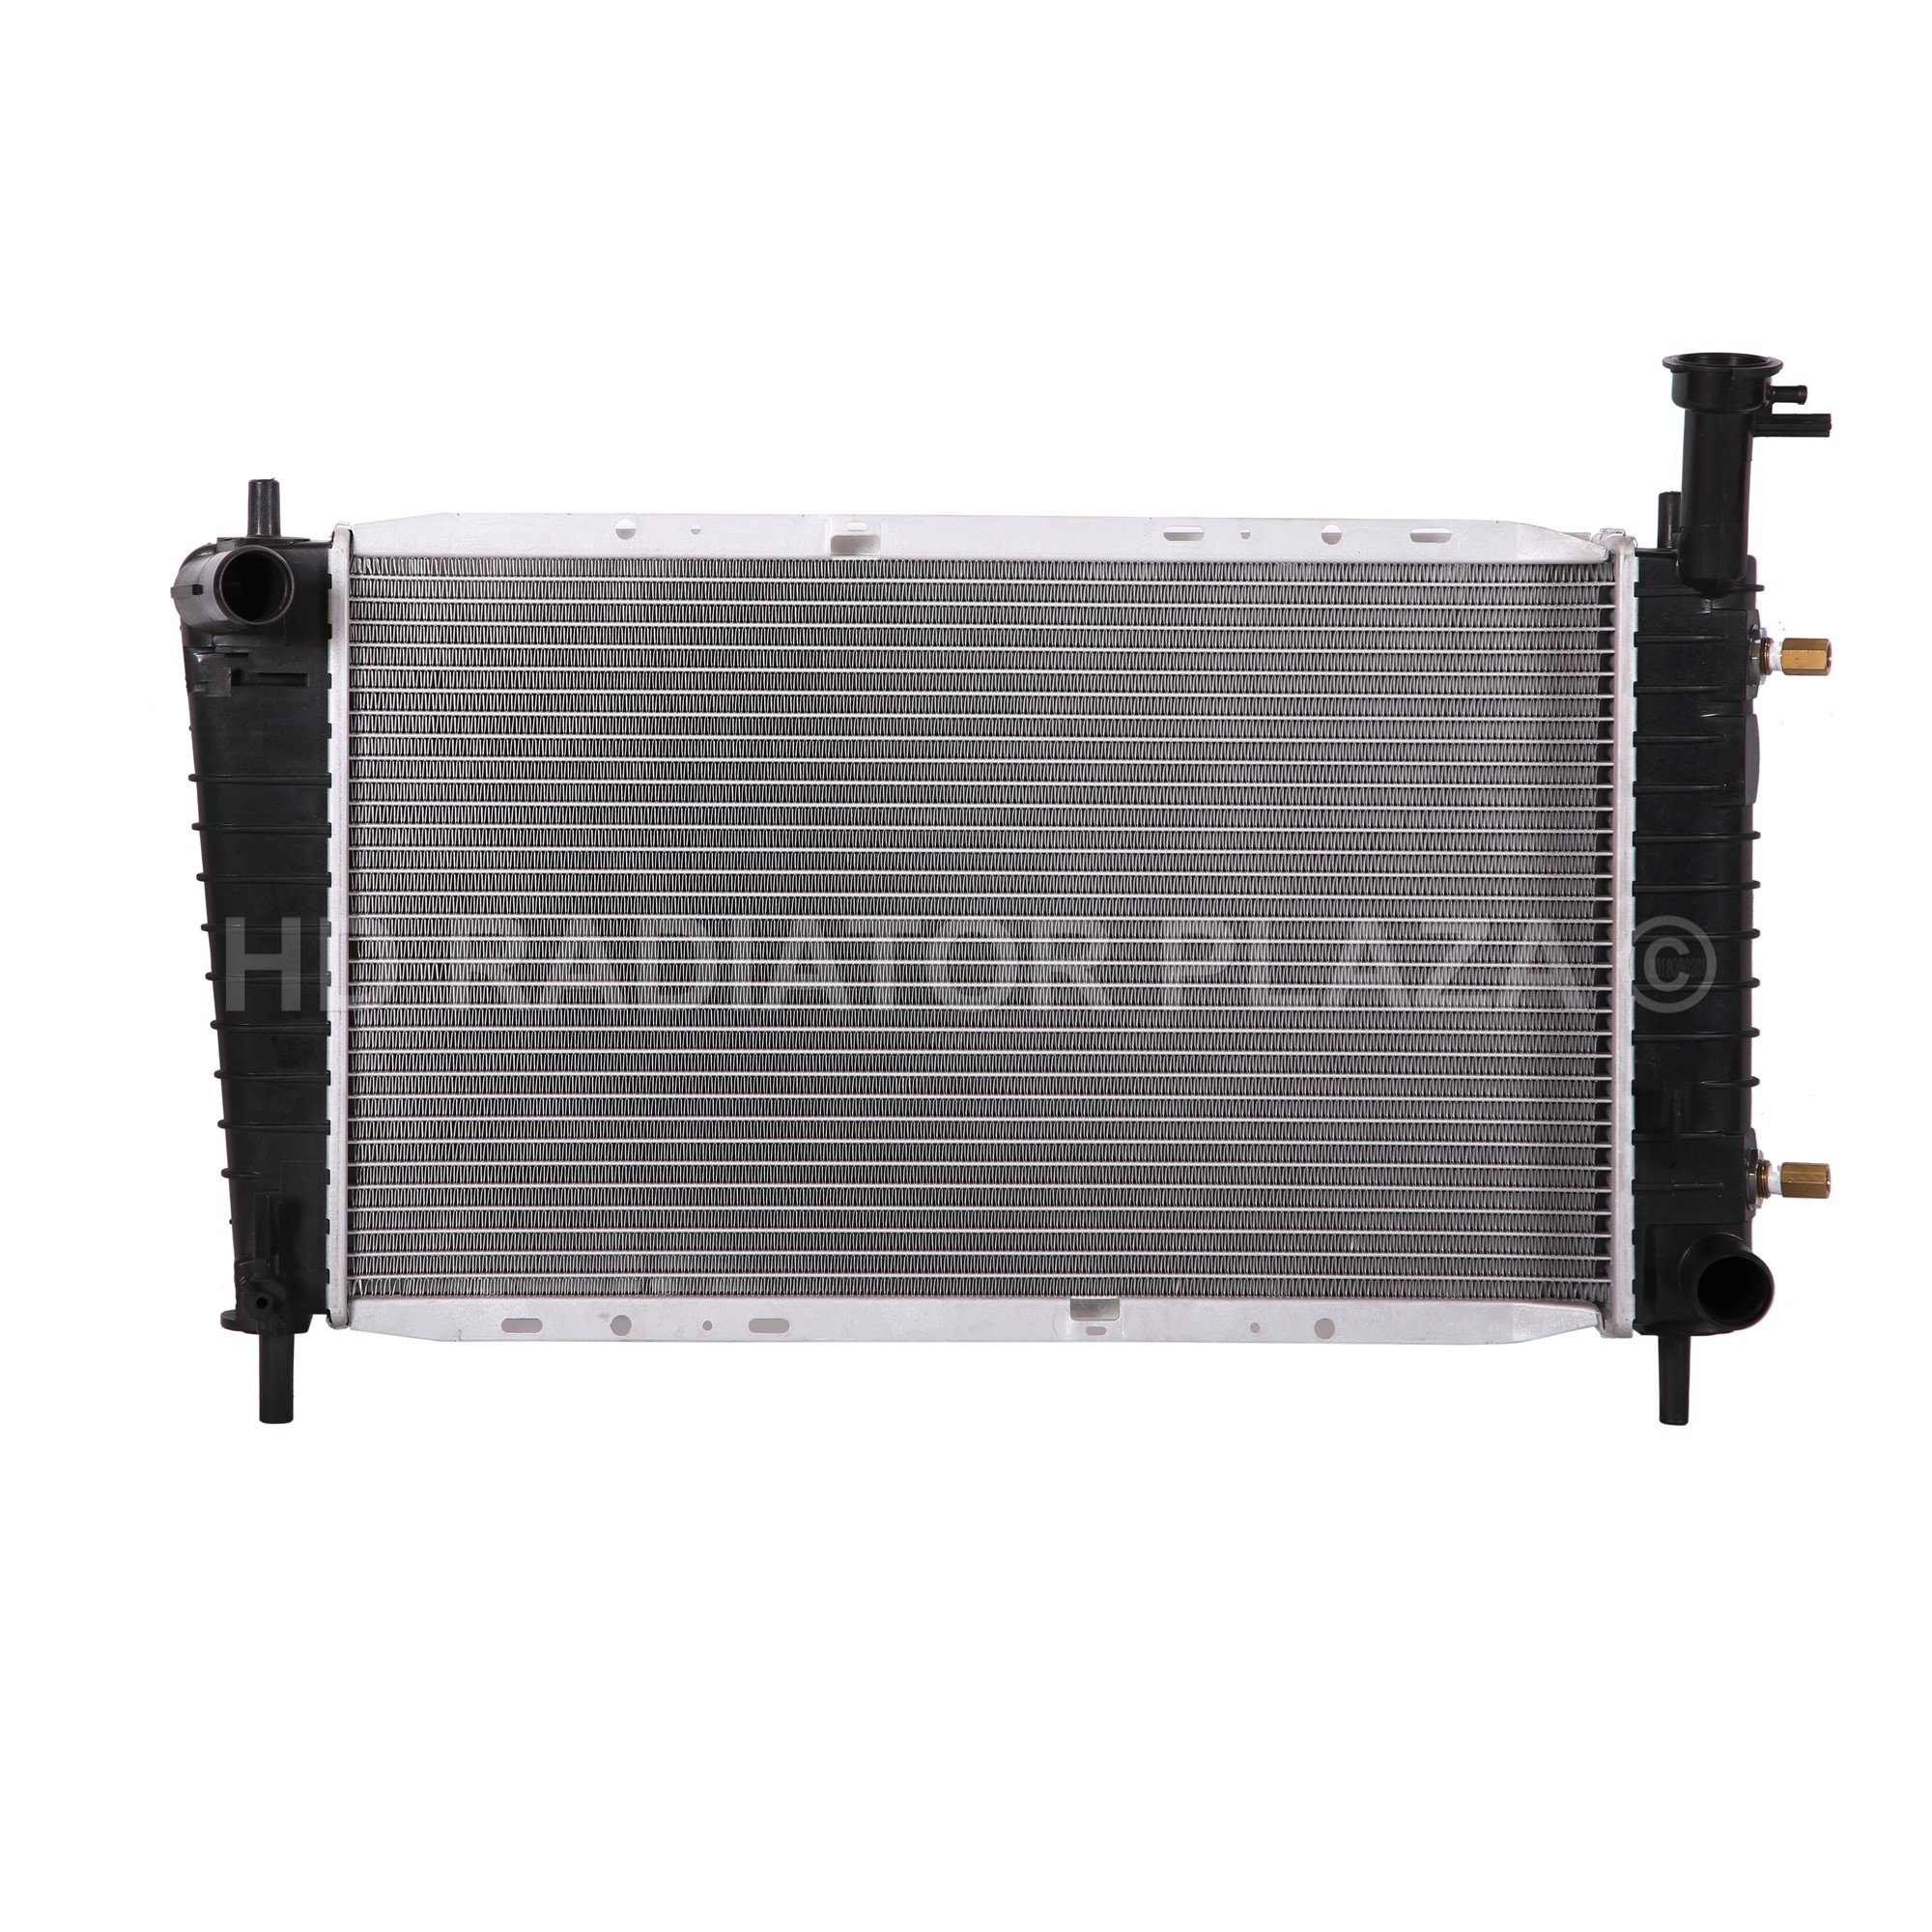 Radiator for 88-95 Ford Taurus, Lincoln Continental, Mercury Sable